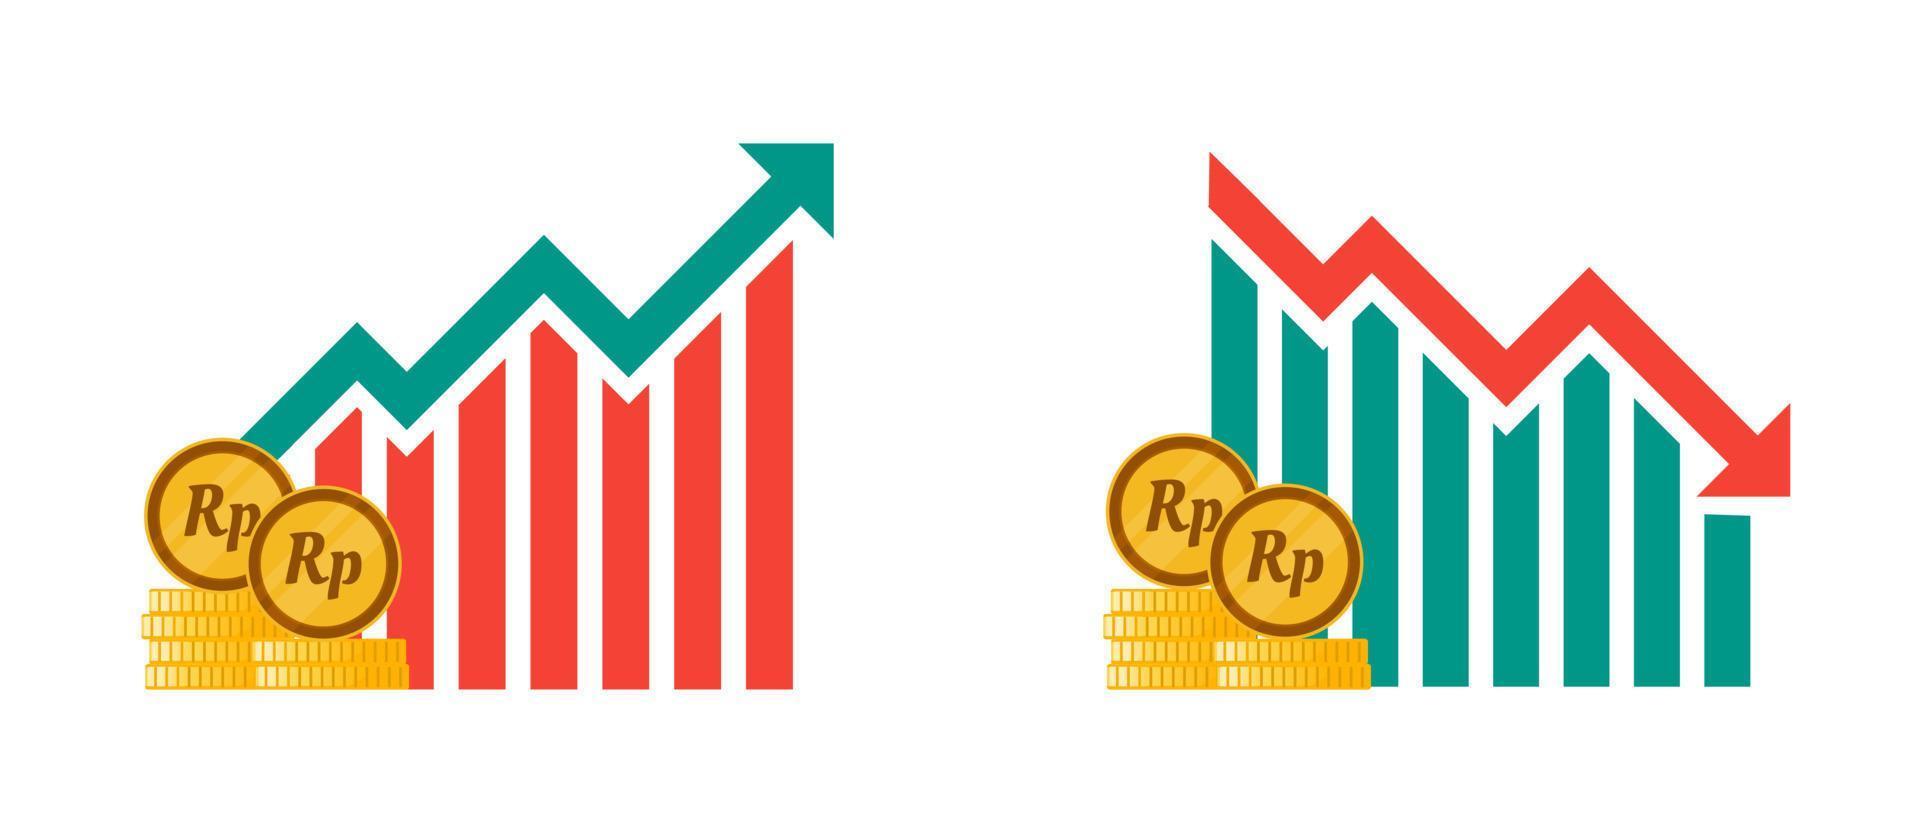 Indonesian Rupiah Currency Fluctuation Illustrations vector